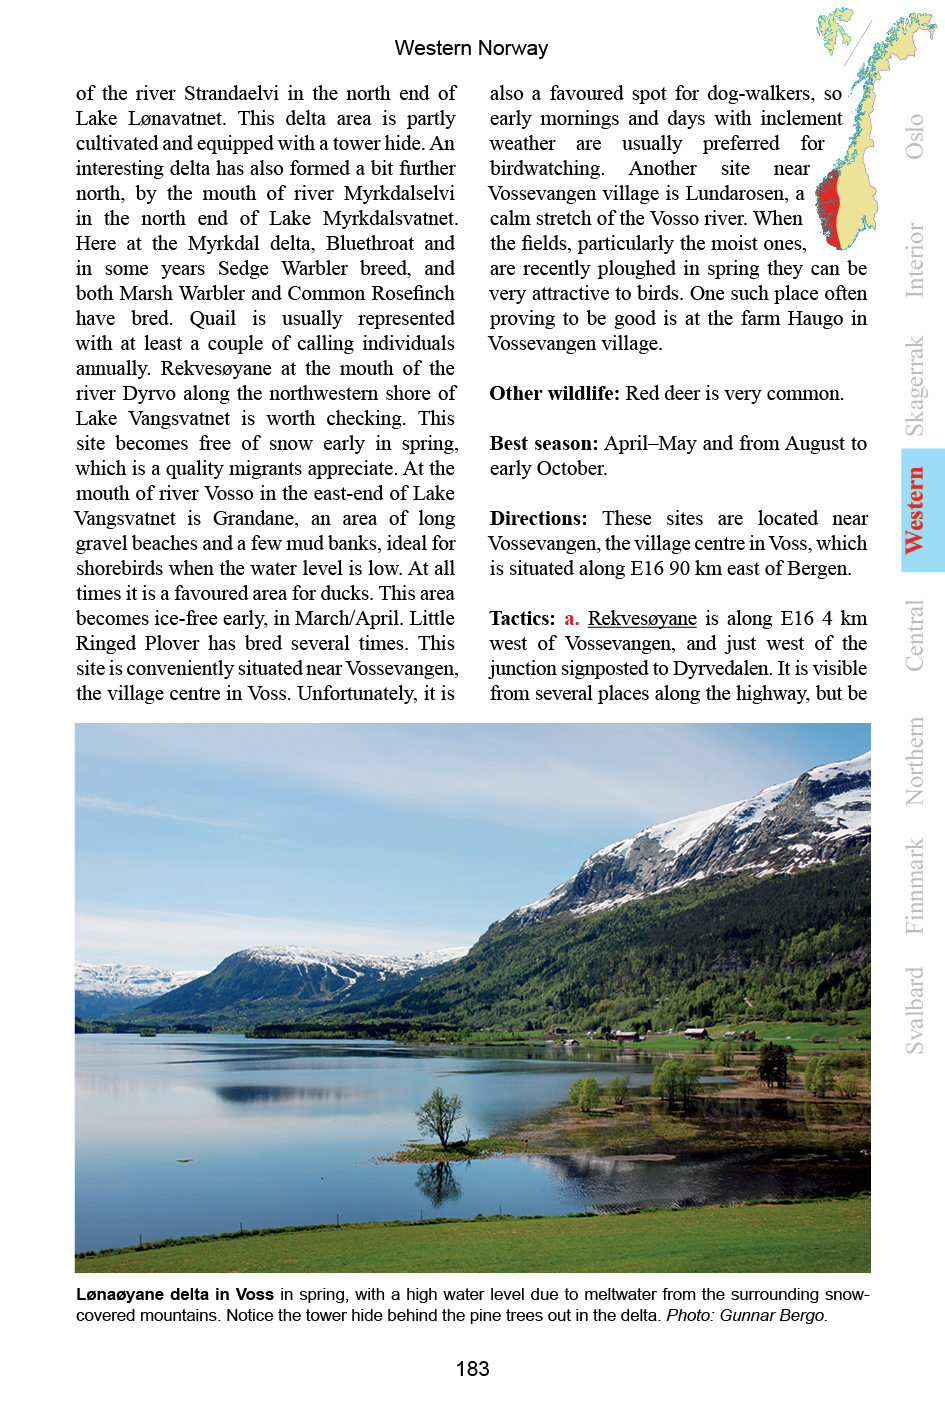 Page 183 of Birdwatching in Norway showing the Lonaoyane delta in Voss, Western Norway.